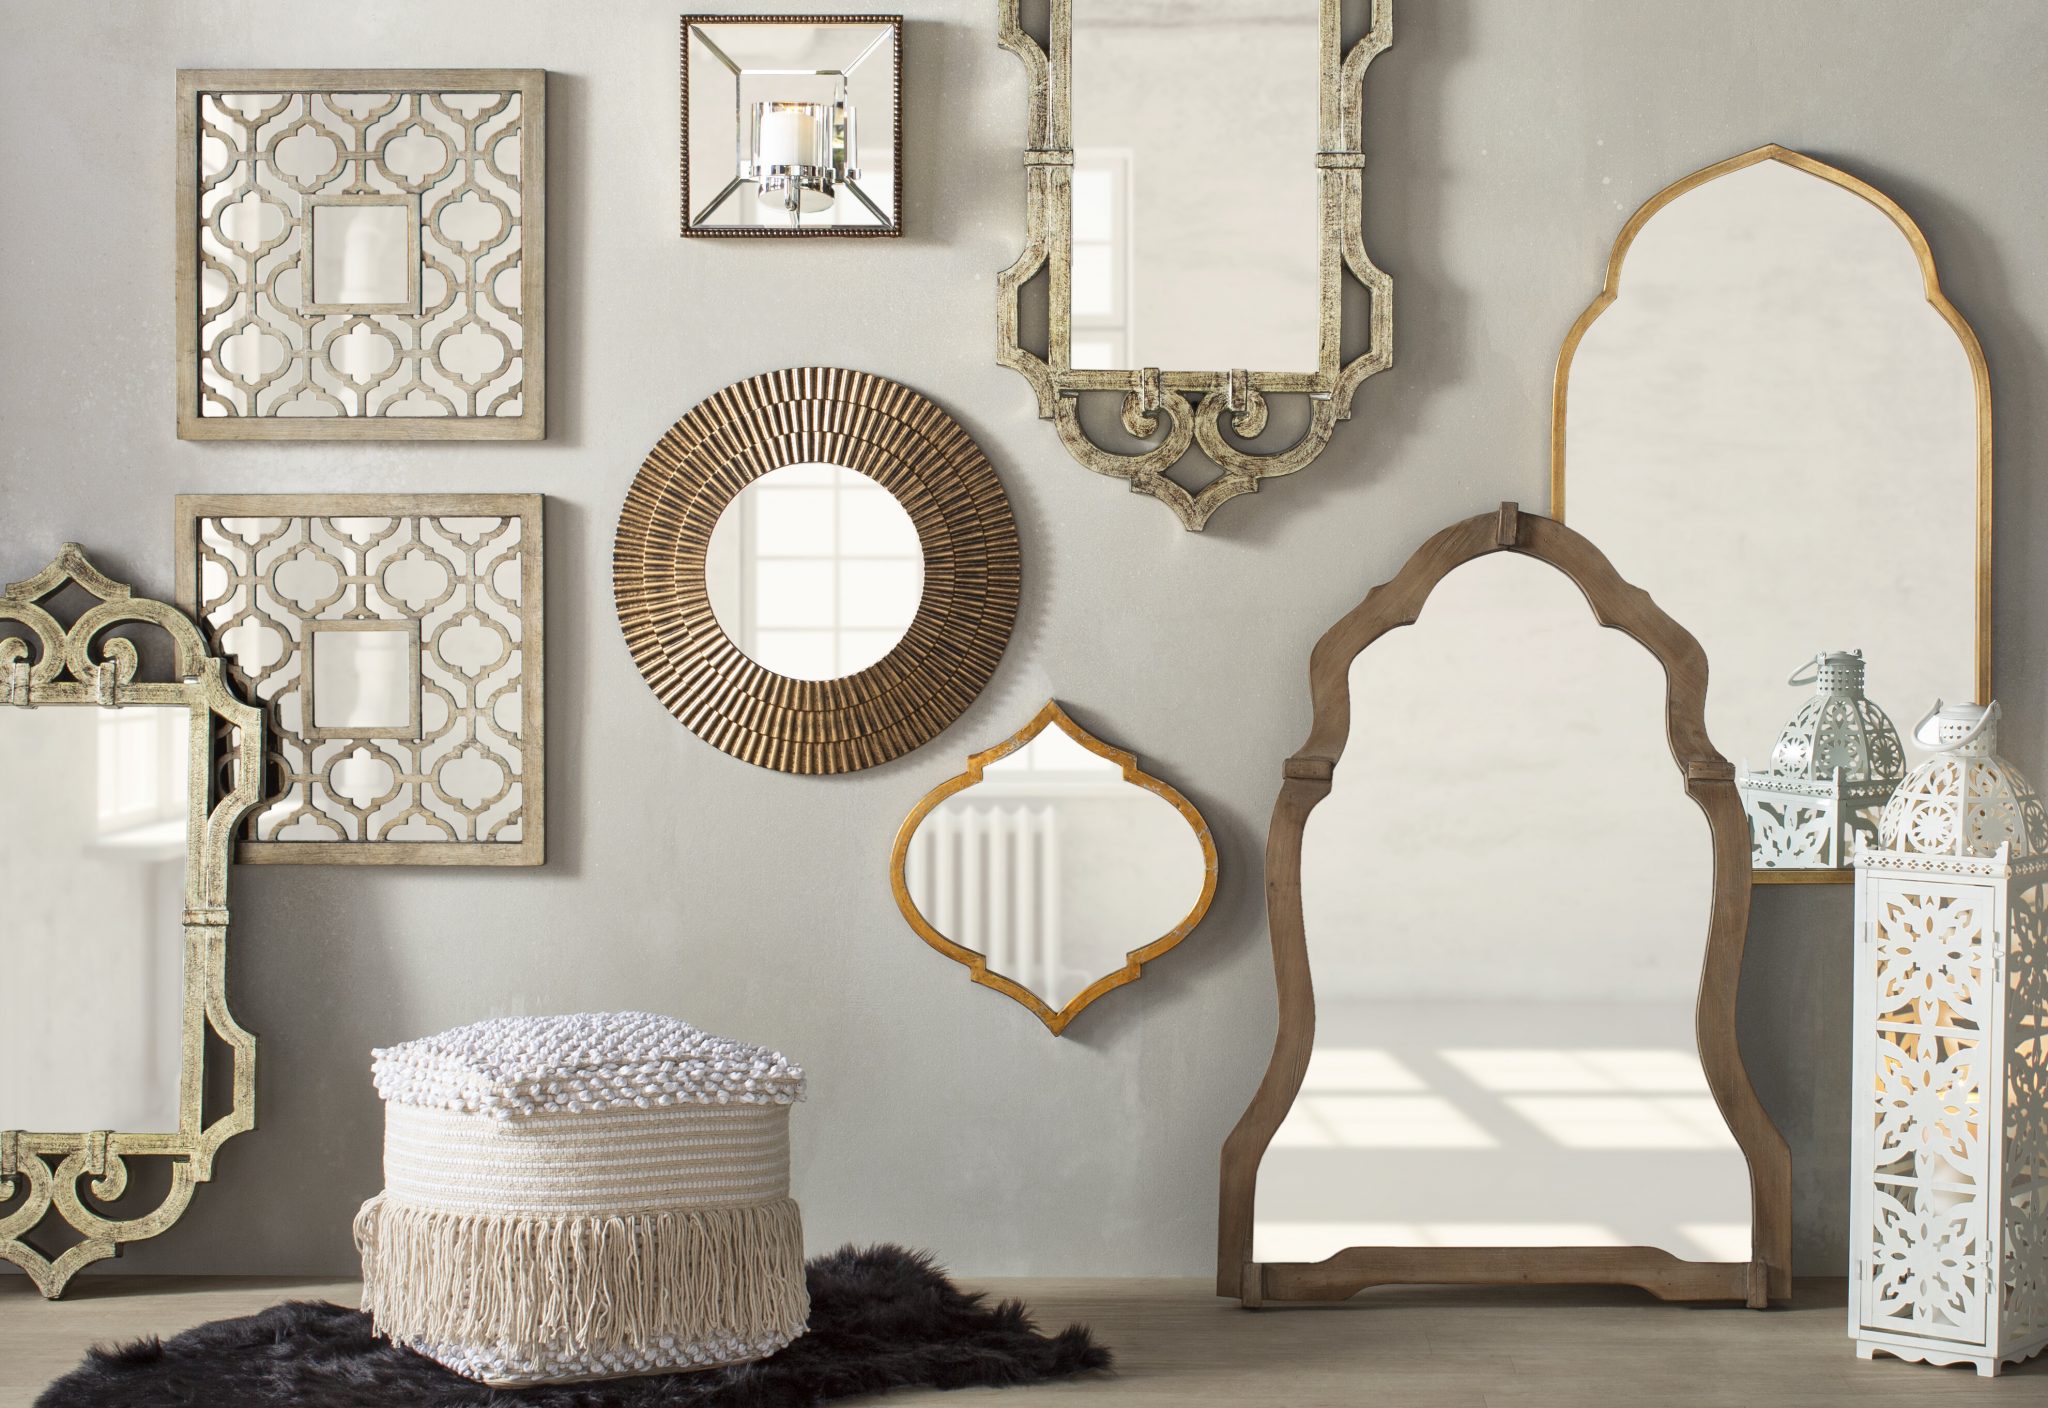 Mirrors For Wall: Reflect The Beauty Of Your Home